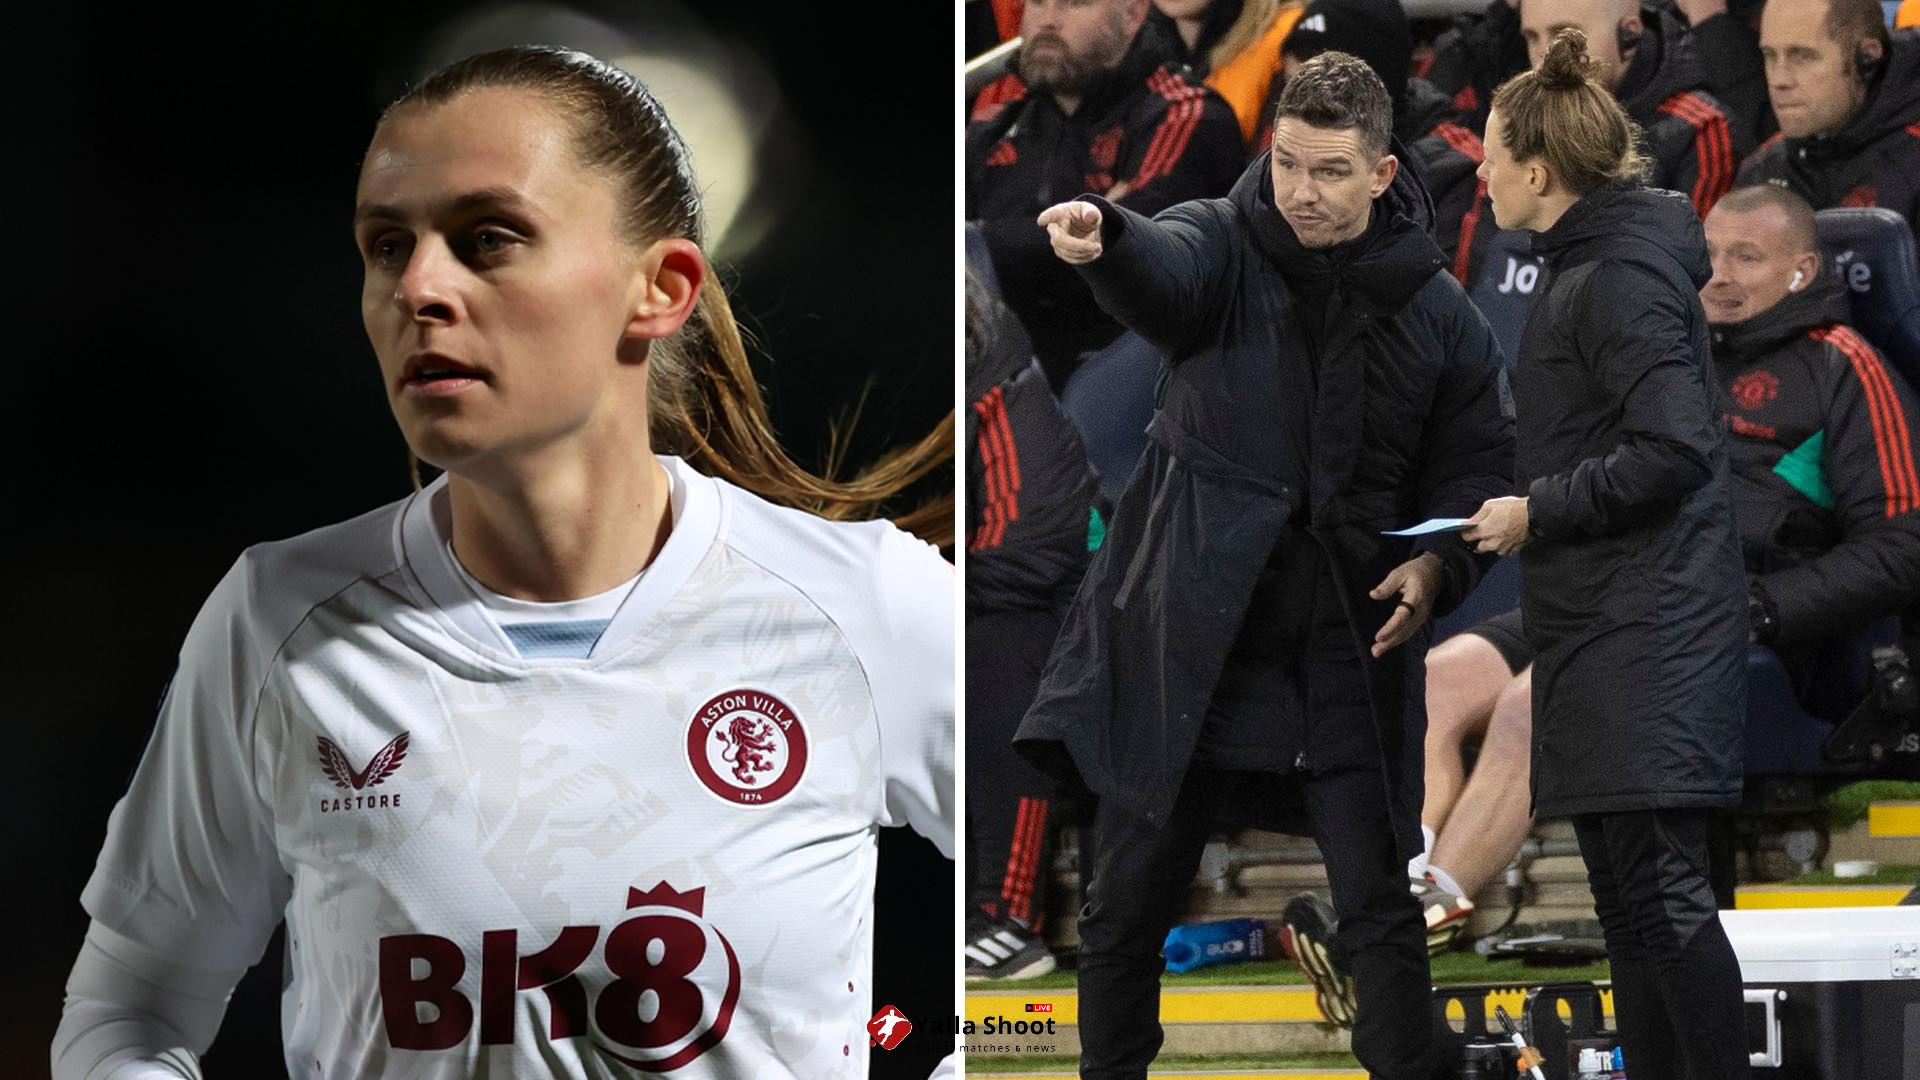 Man Utd knocked out of Women's League Cup after Aston Villa 'ineligible player' punishment